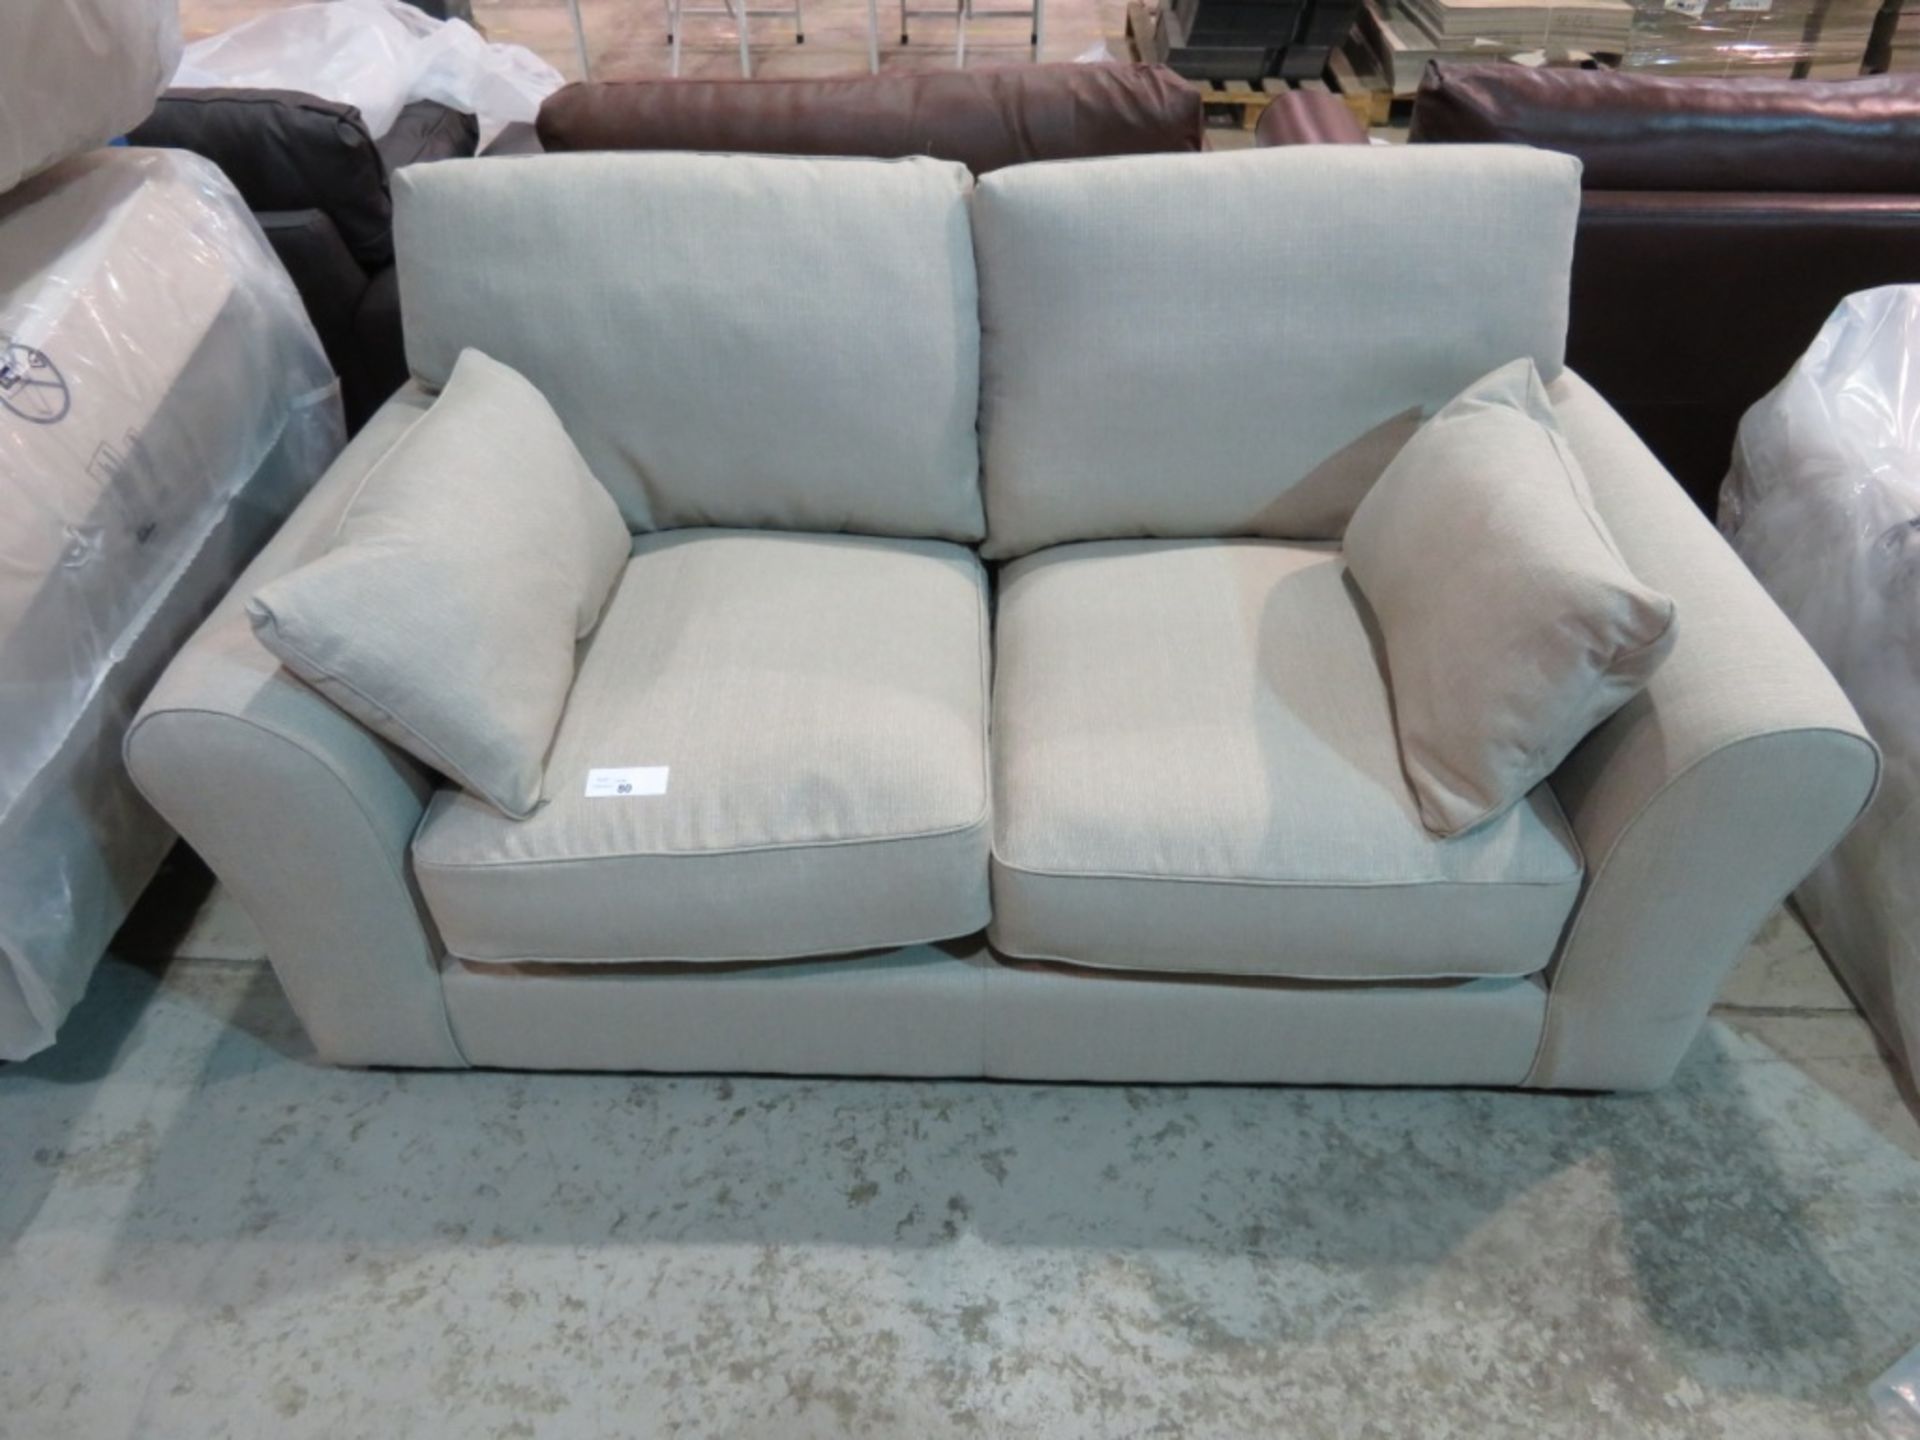 2 Seater beige sofa. New in factory wrapping - 1770 x 960mm (LxD)